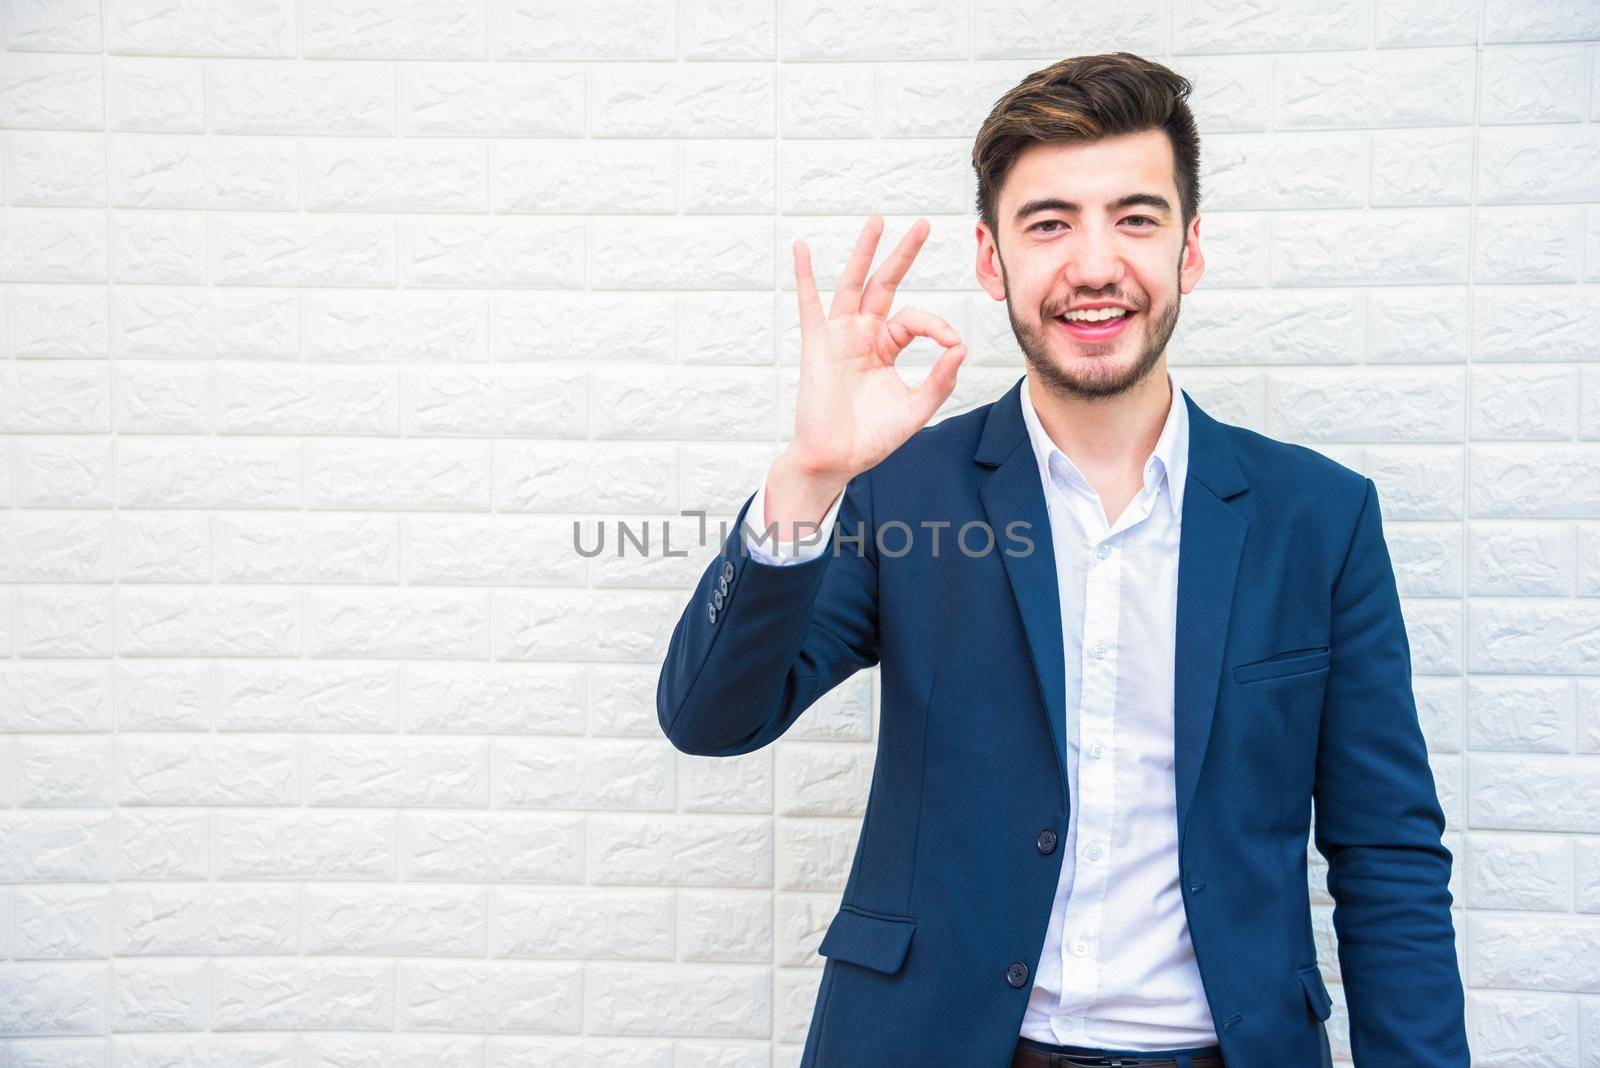 Handsome Businessman doing okay or alright gesture. Business and success concept. People and Portrait theme.